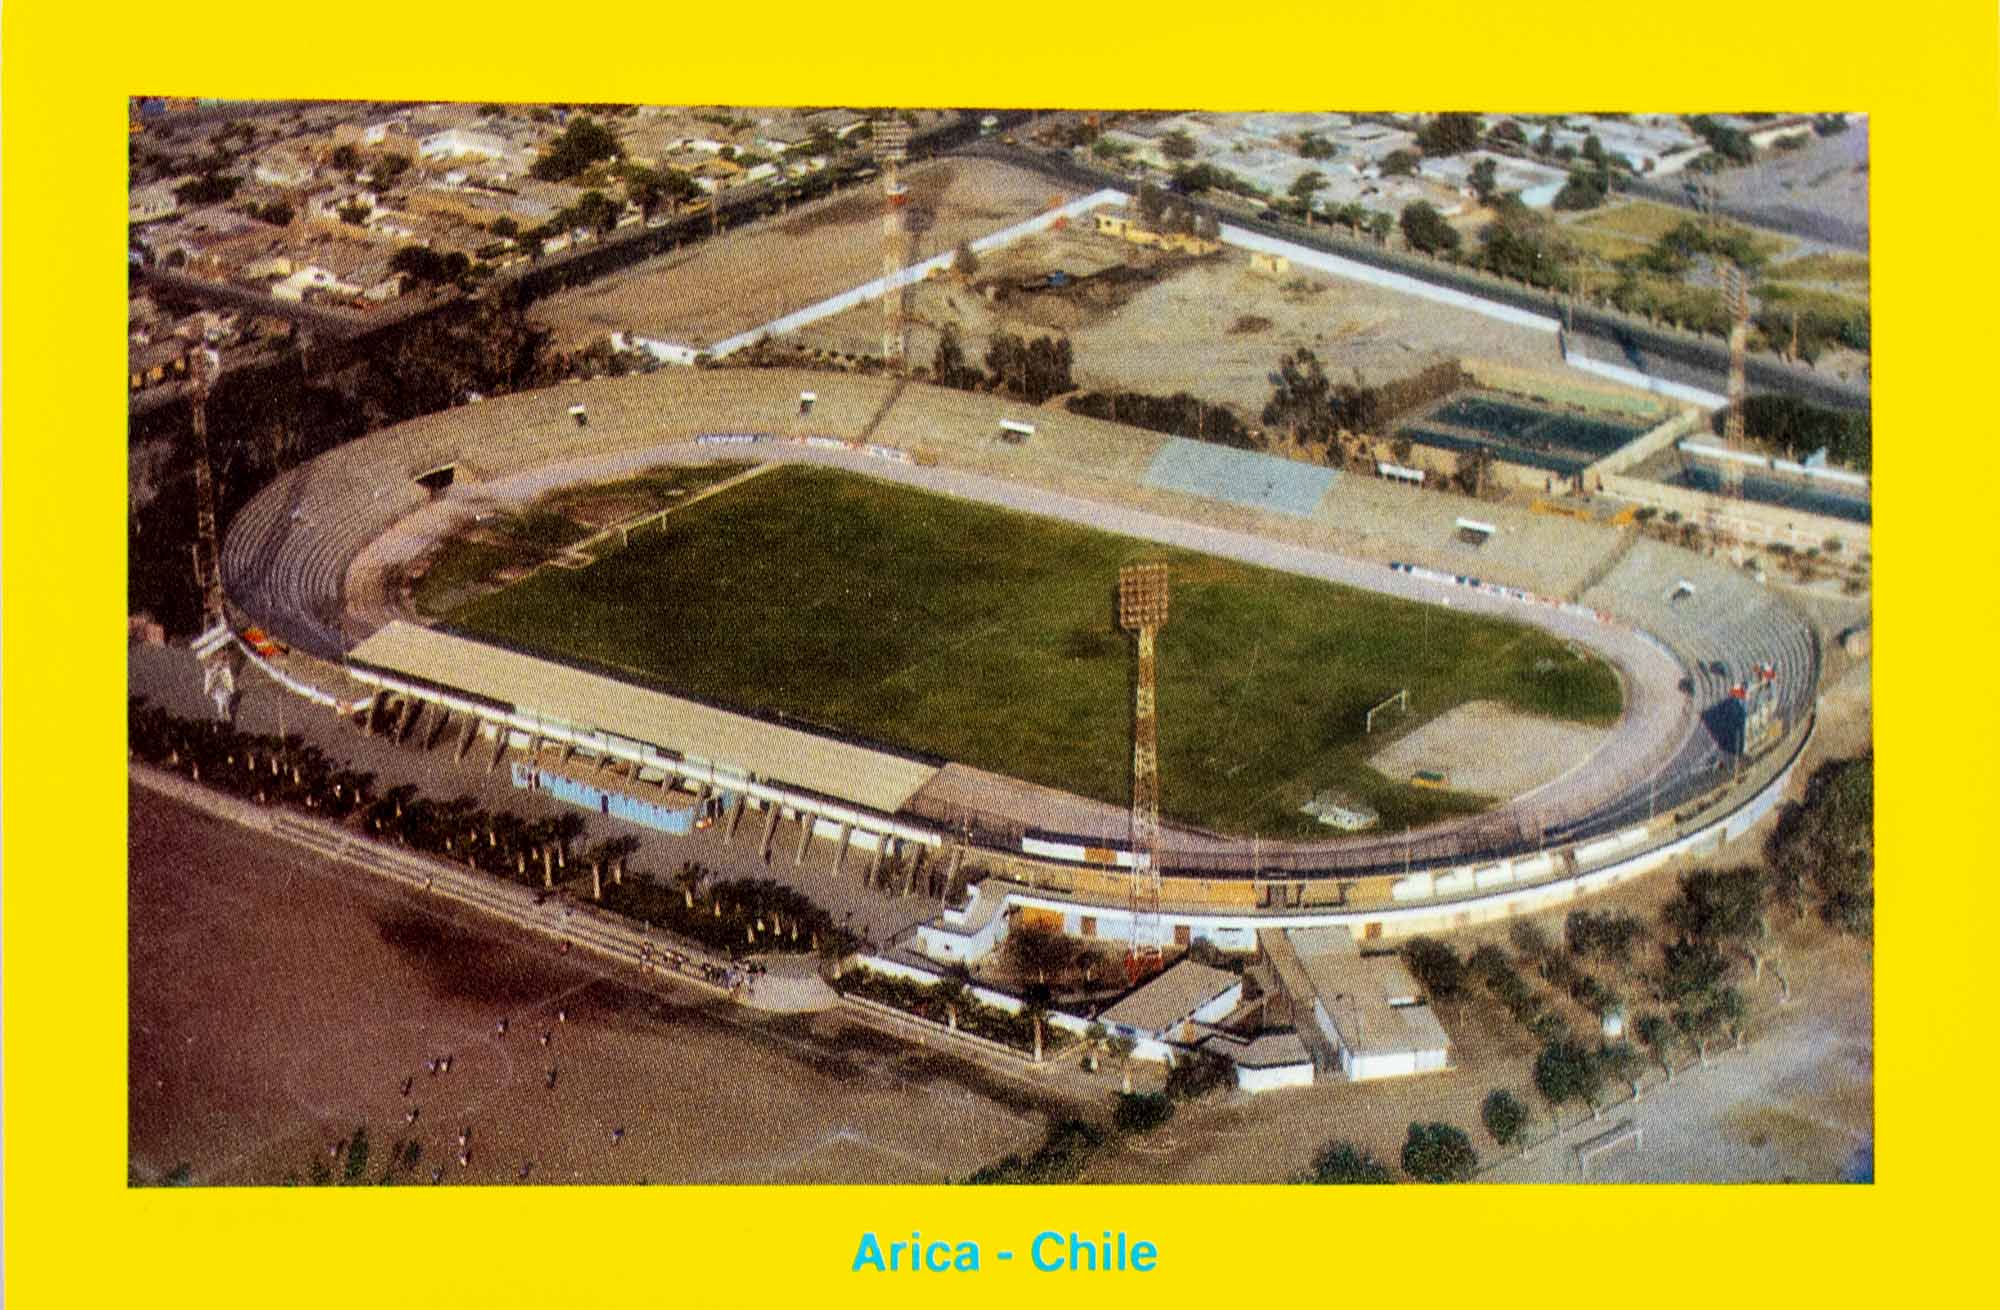 Pohlednice Stadion, Arica, Chile